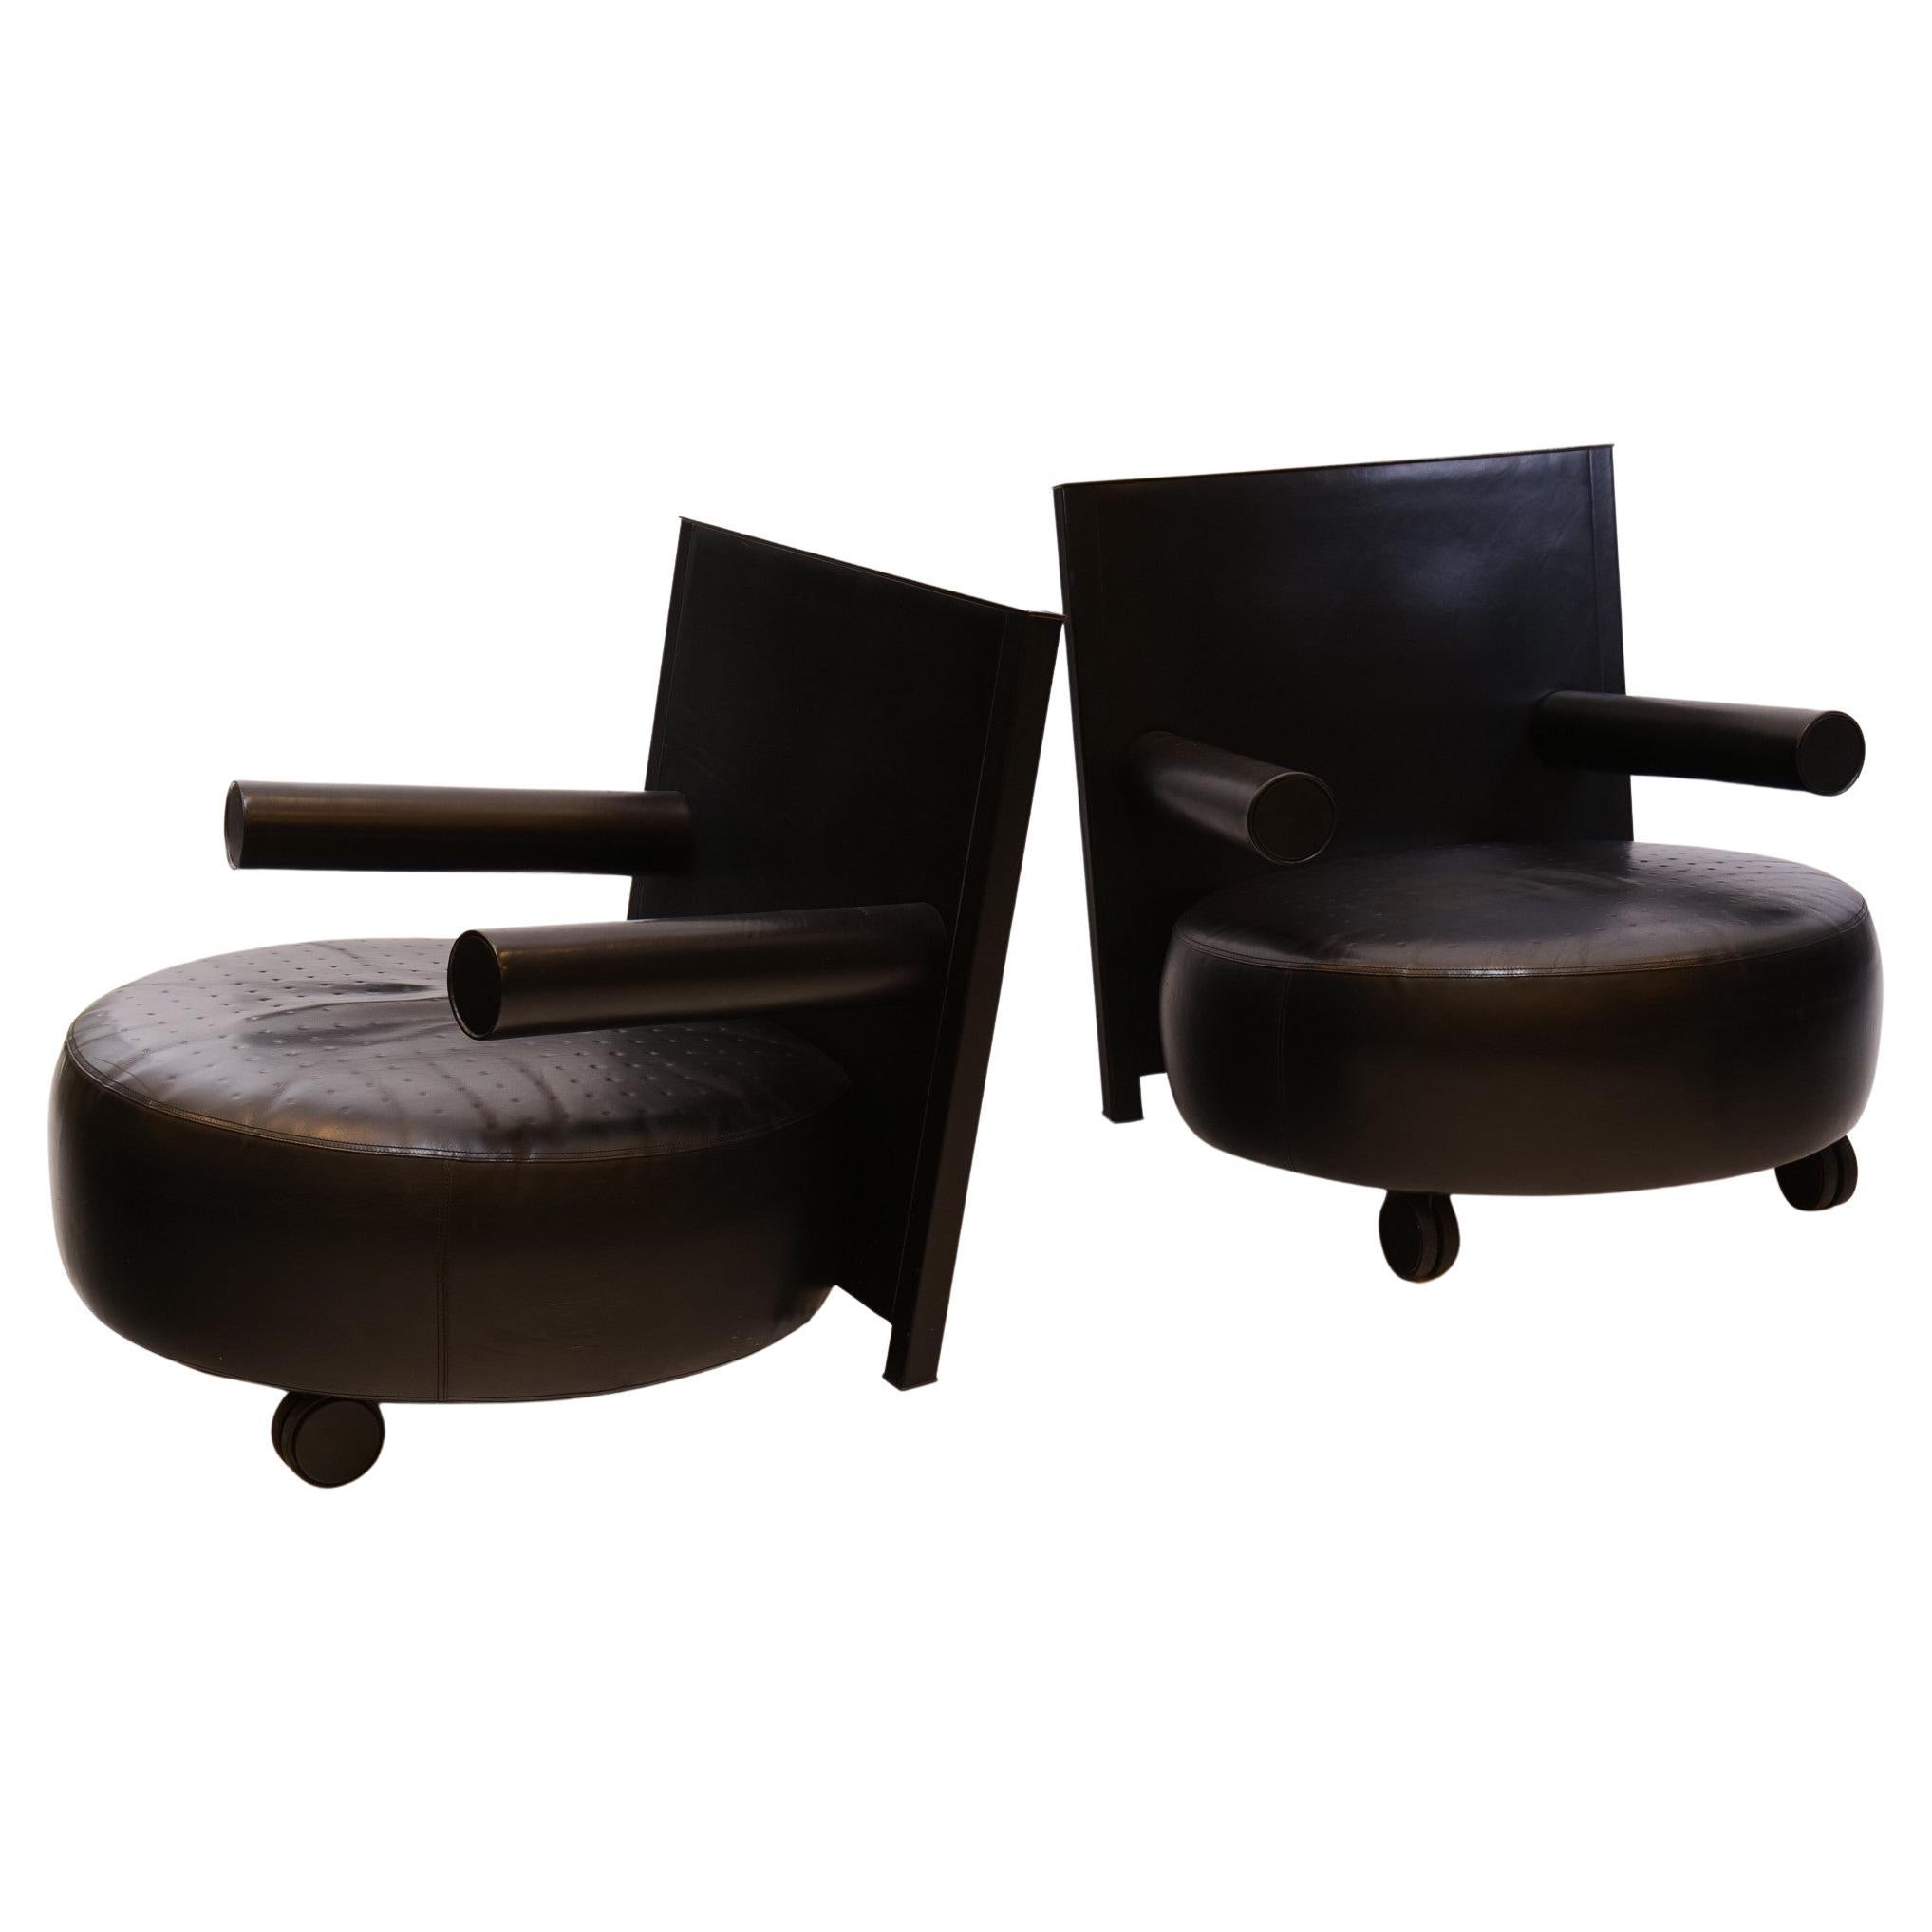 Armchair mod. Baisity by Antonio Citterio for B&B


Antonio Citterio was born in Meda, Italy, in 1950. He opened his own studio in 1972 and graduated in architecture from Milan Polytechnic in 1975. From 1987 to 1996, he designed buildings in